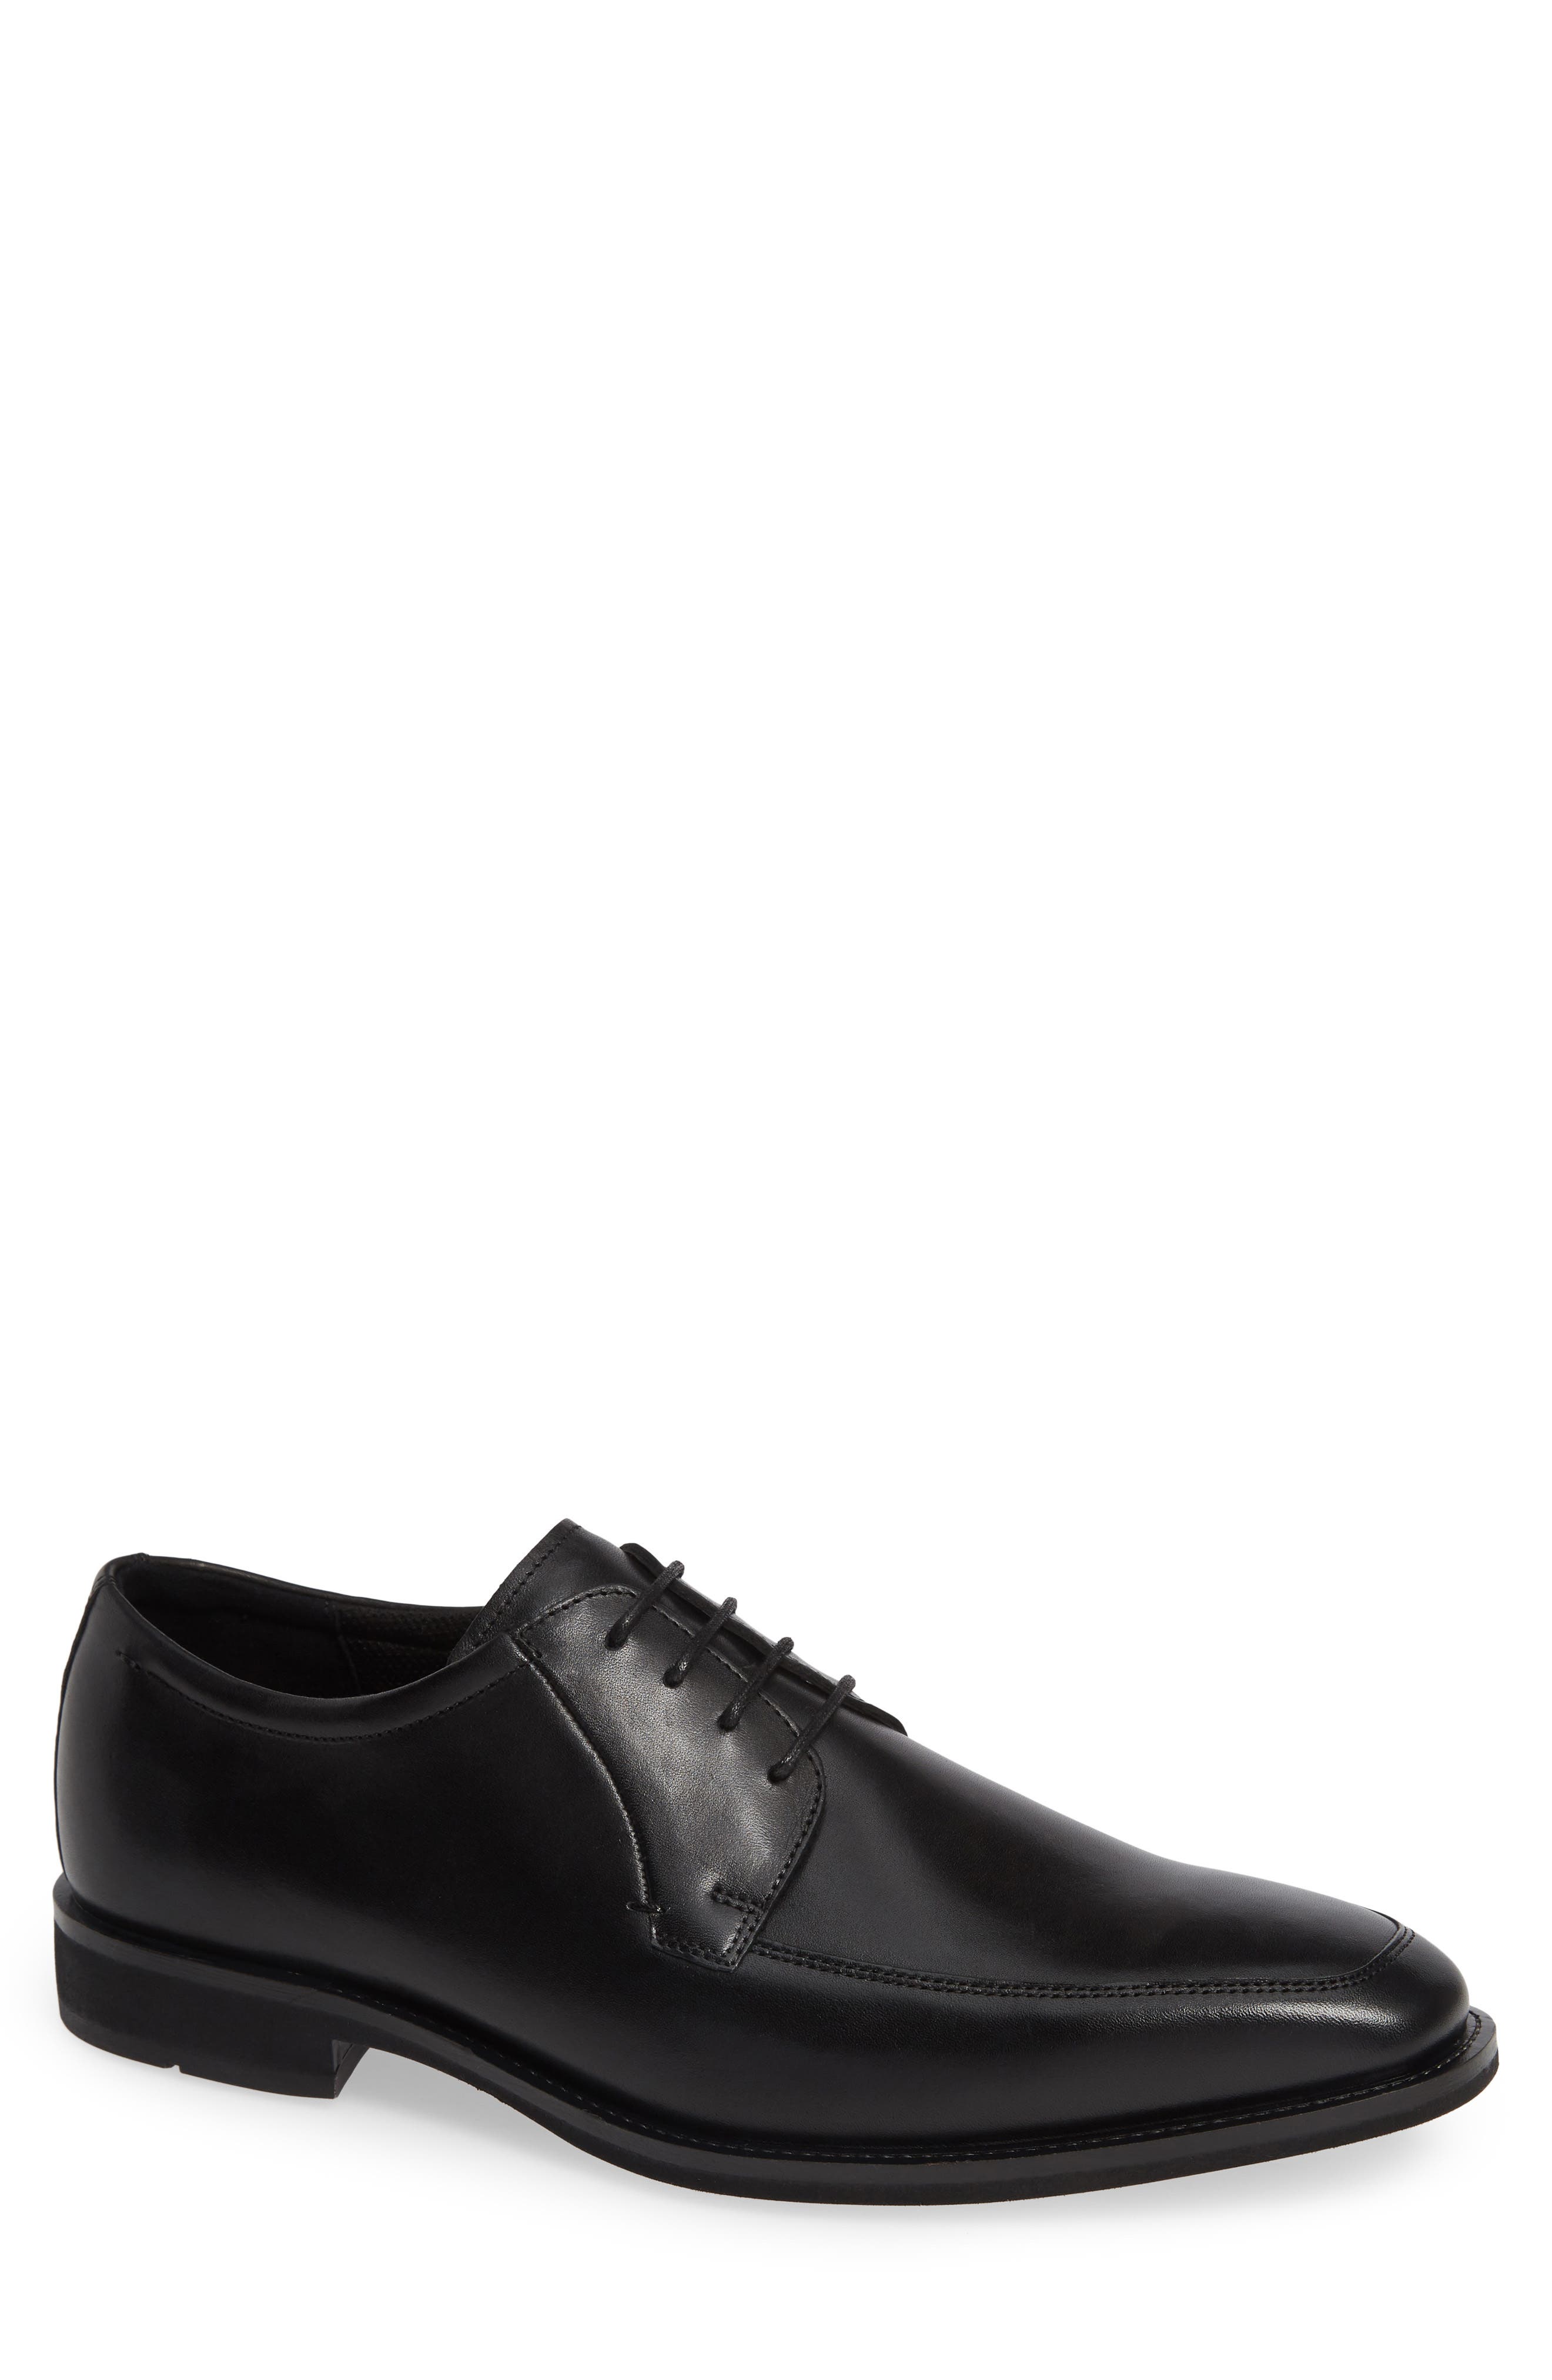 ecco mens dress shoes clearance